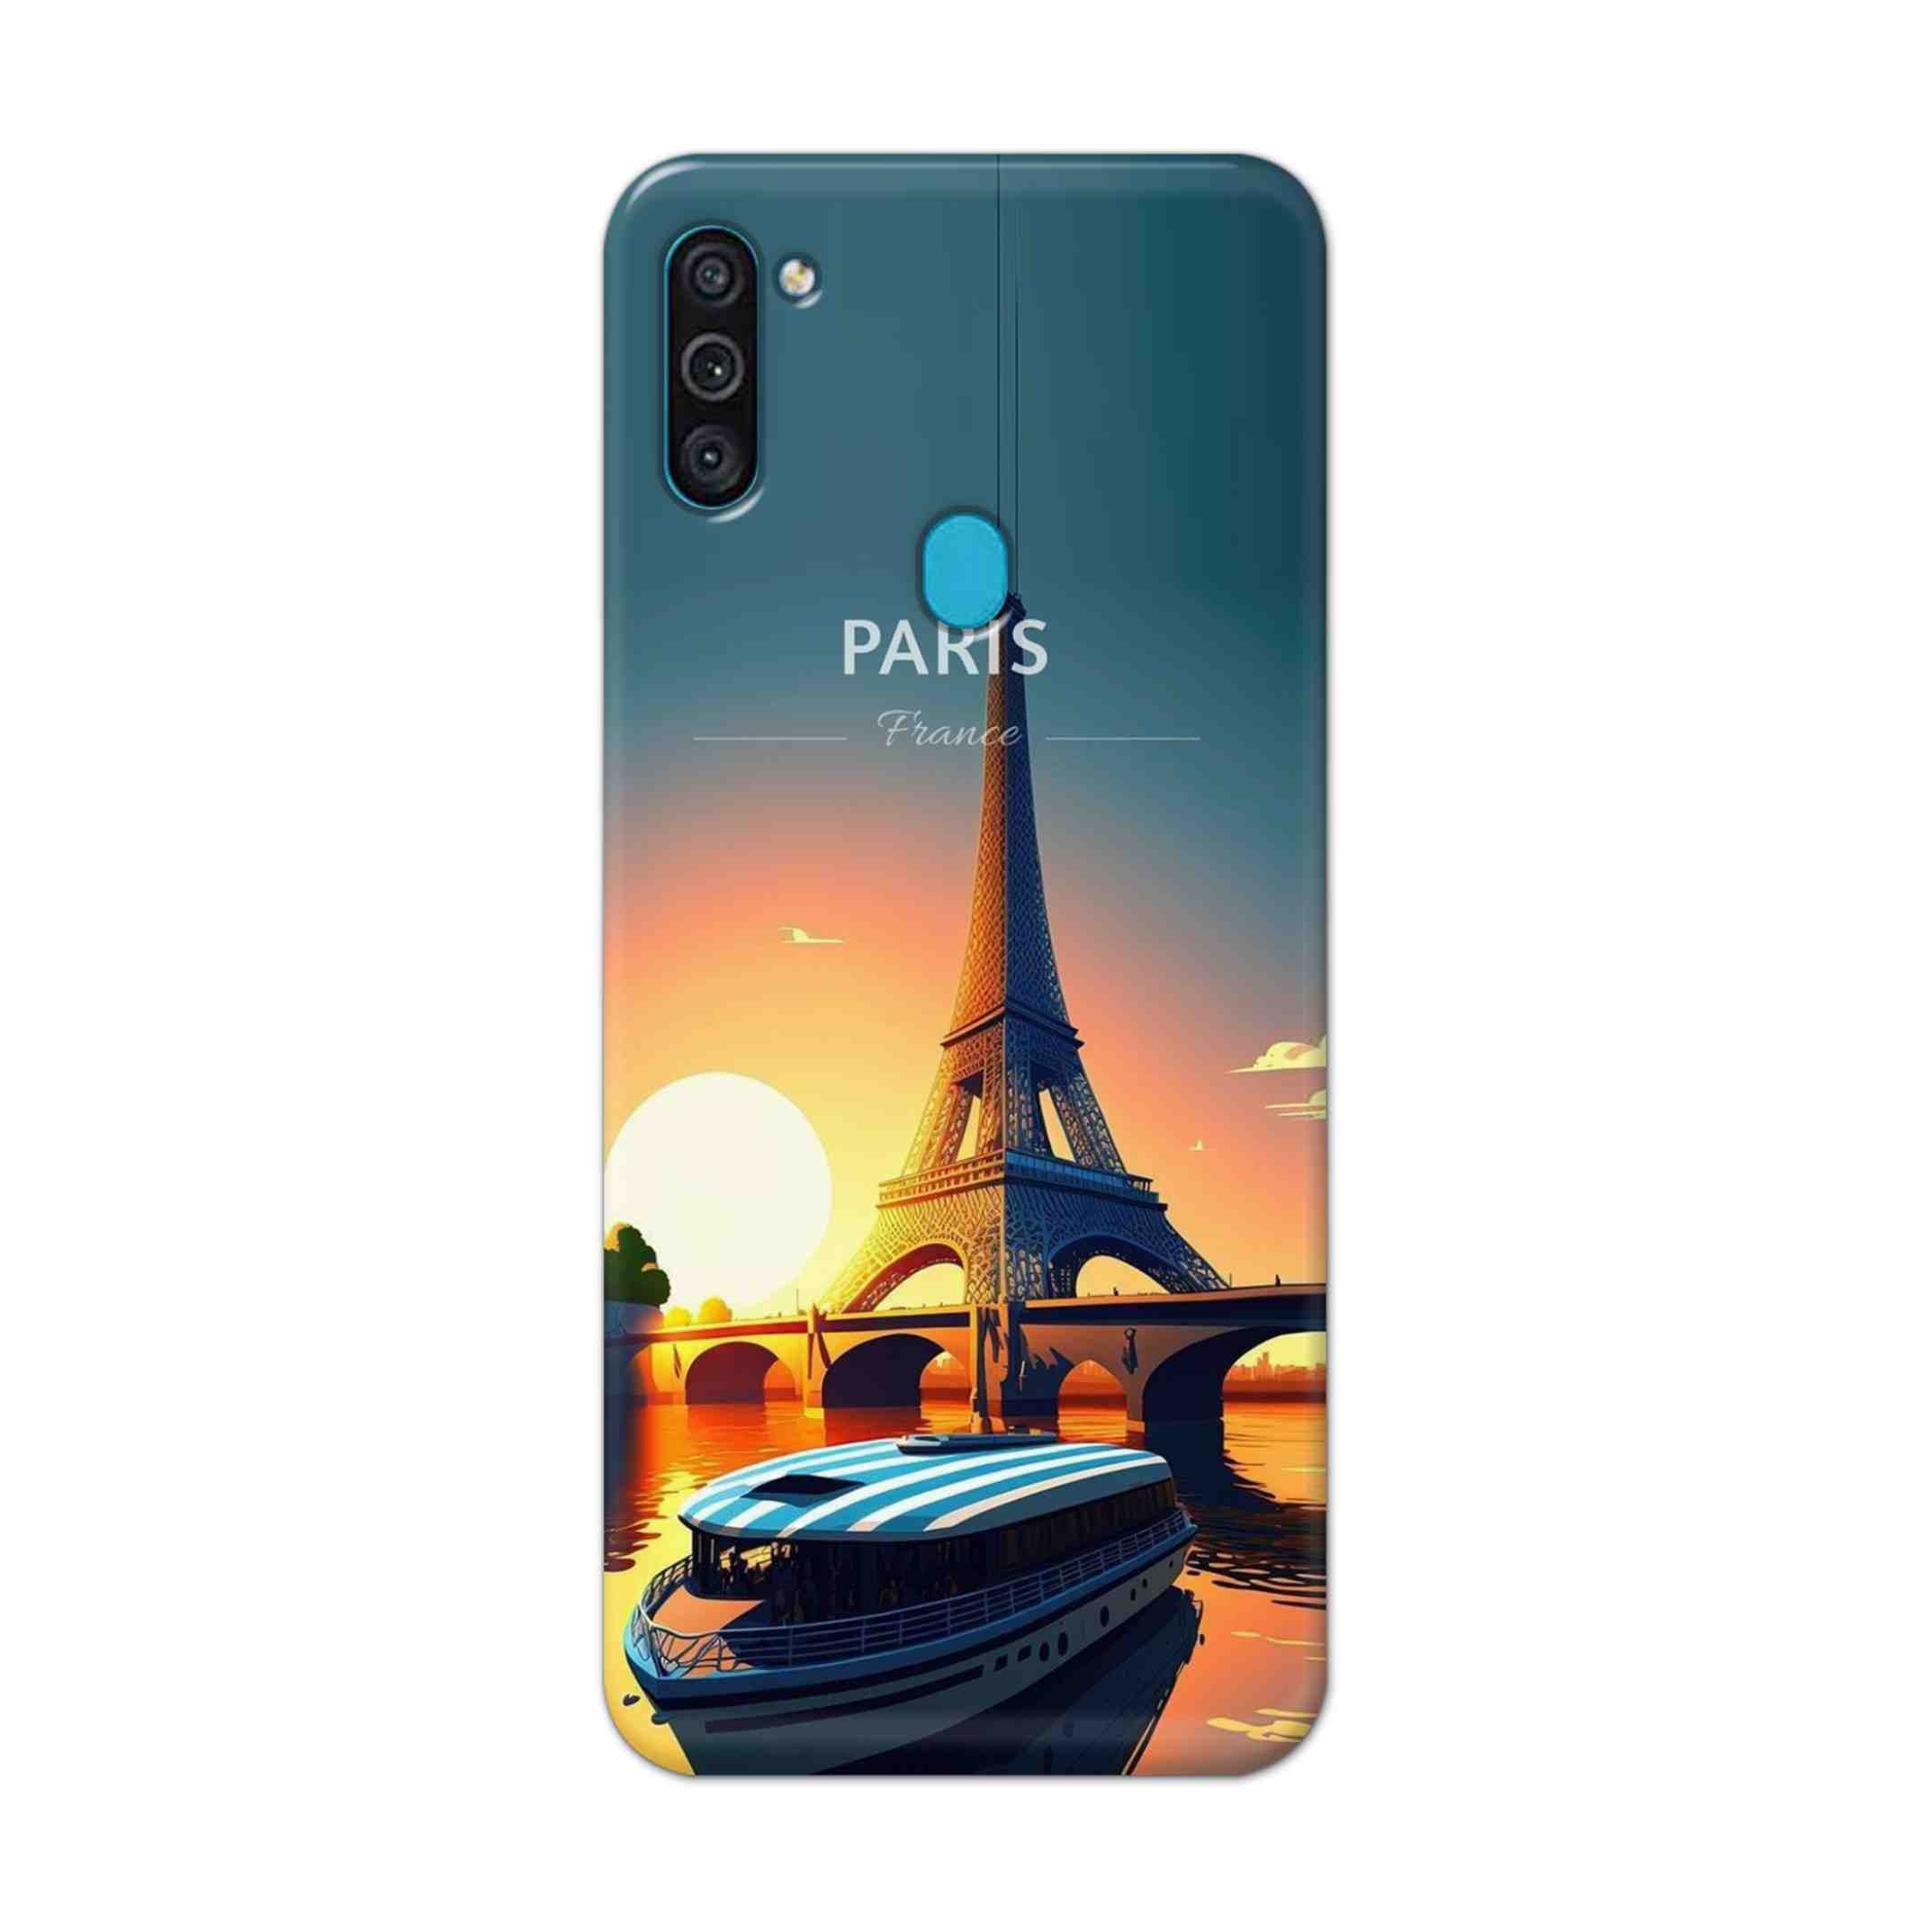 Buy France Hard Back Mobile Phone Case Cover For Samsung Galaxy M11 Online